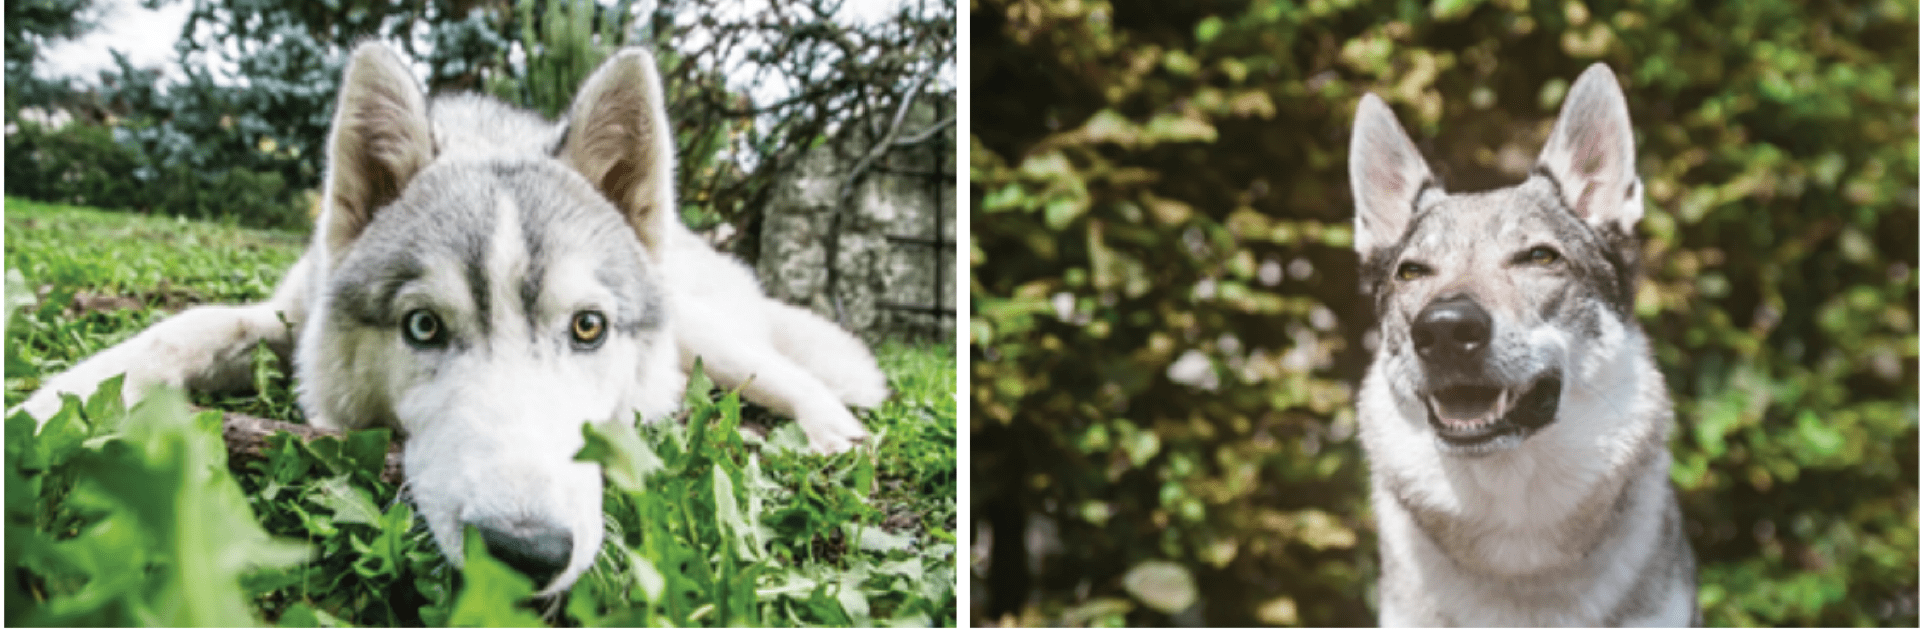 Two pictures side by side of similar looking animals. On the left is a Siberian husky laying on its stomach in the grass and staring at the camera. On the right is a Czechoslovakian wolfdog (hybrid) looking off camera, its chest is partially visible, and the background is blurred foliage.